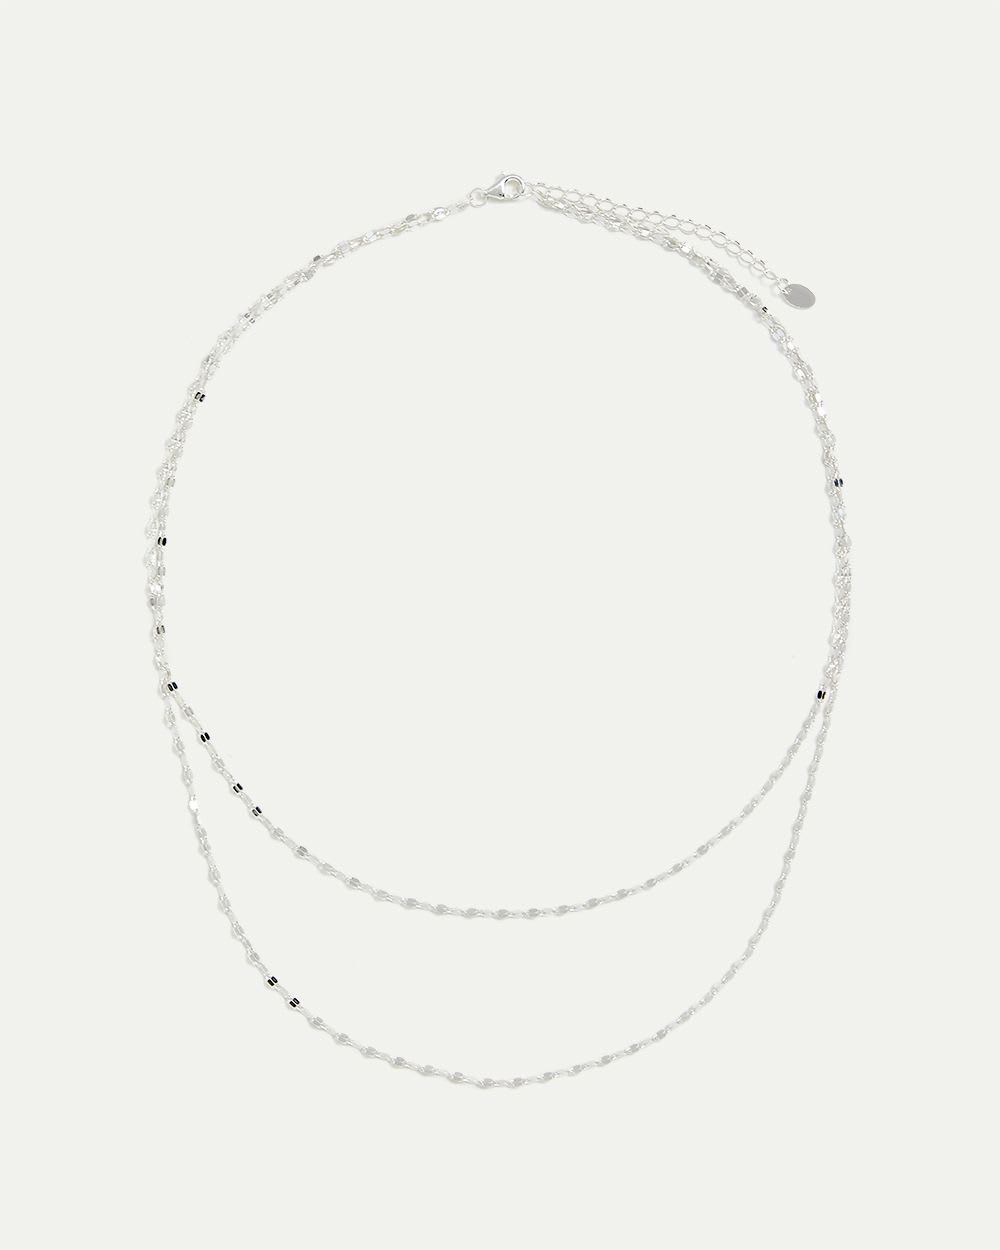 2-Layer Sterling Silver Flat Link Short Necklace